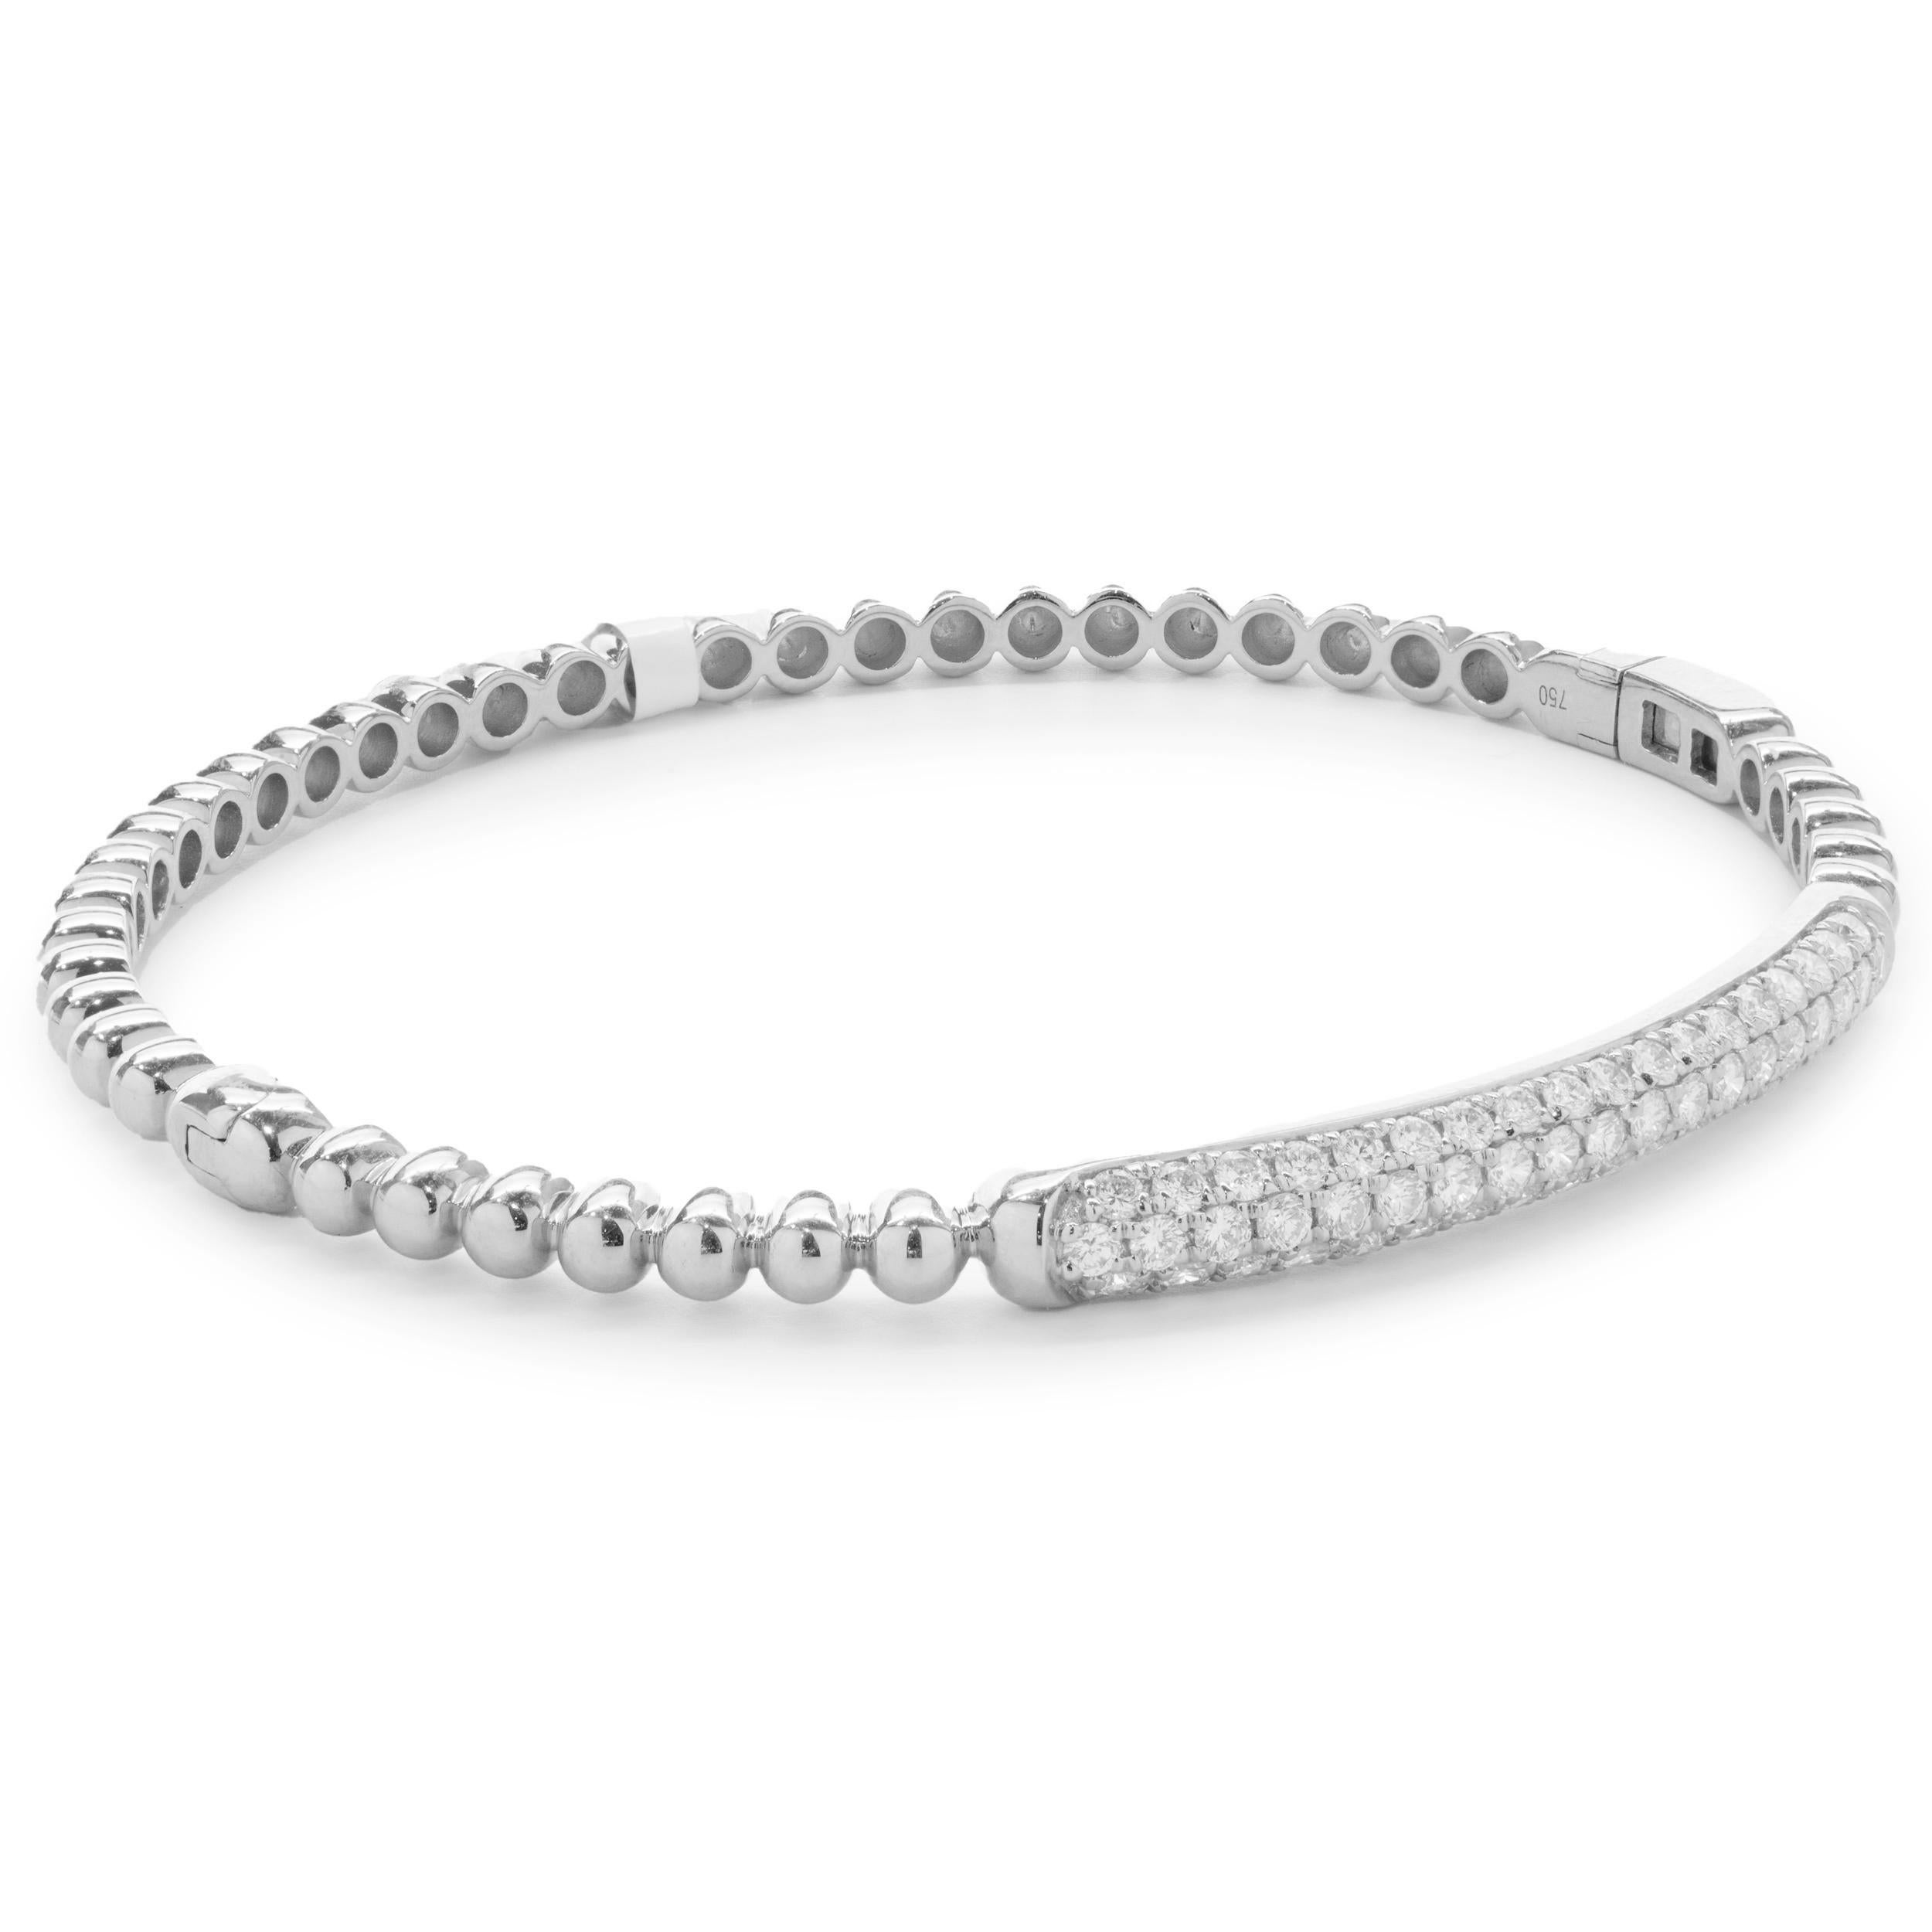 Designer: custom design
Material: 18K white gold
Diamonds: 55 round brilliant cut = 1.06cttw
Color: G 
Clarity: VS2
Dimensions: bracelet will fit up to a 7.5-inch wrist
Weight: 12.99 grams